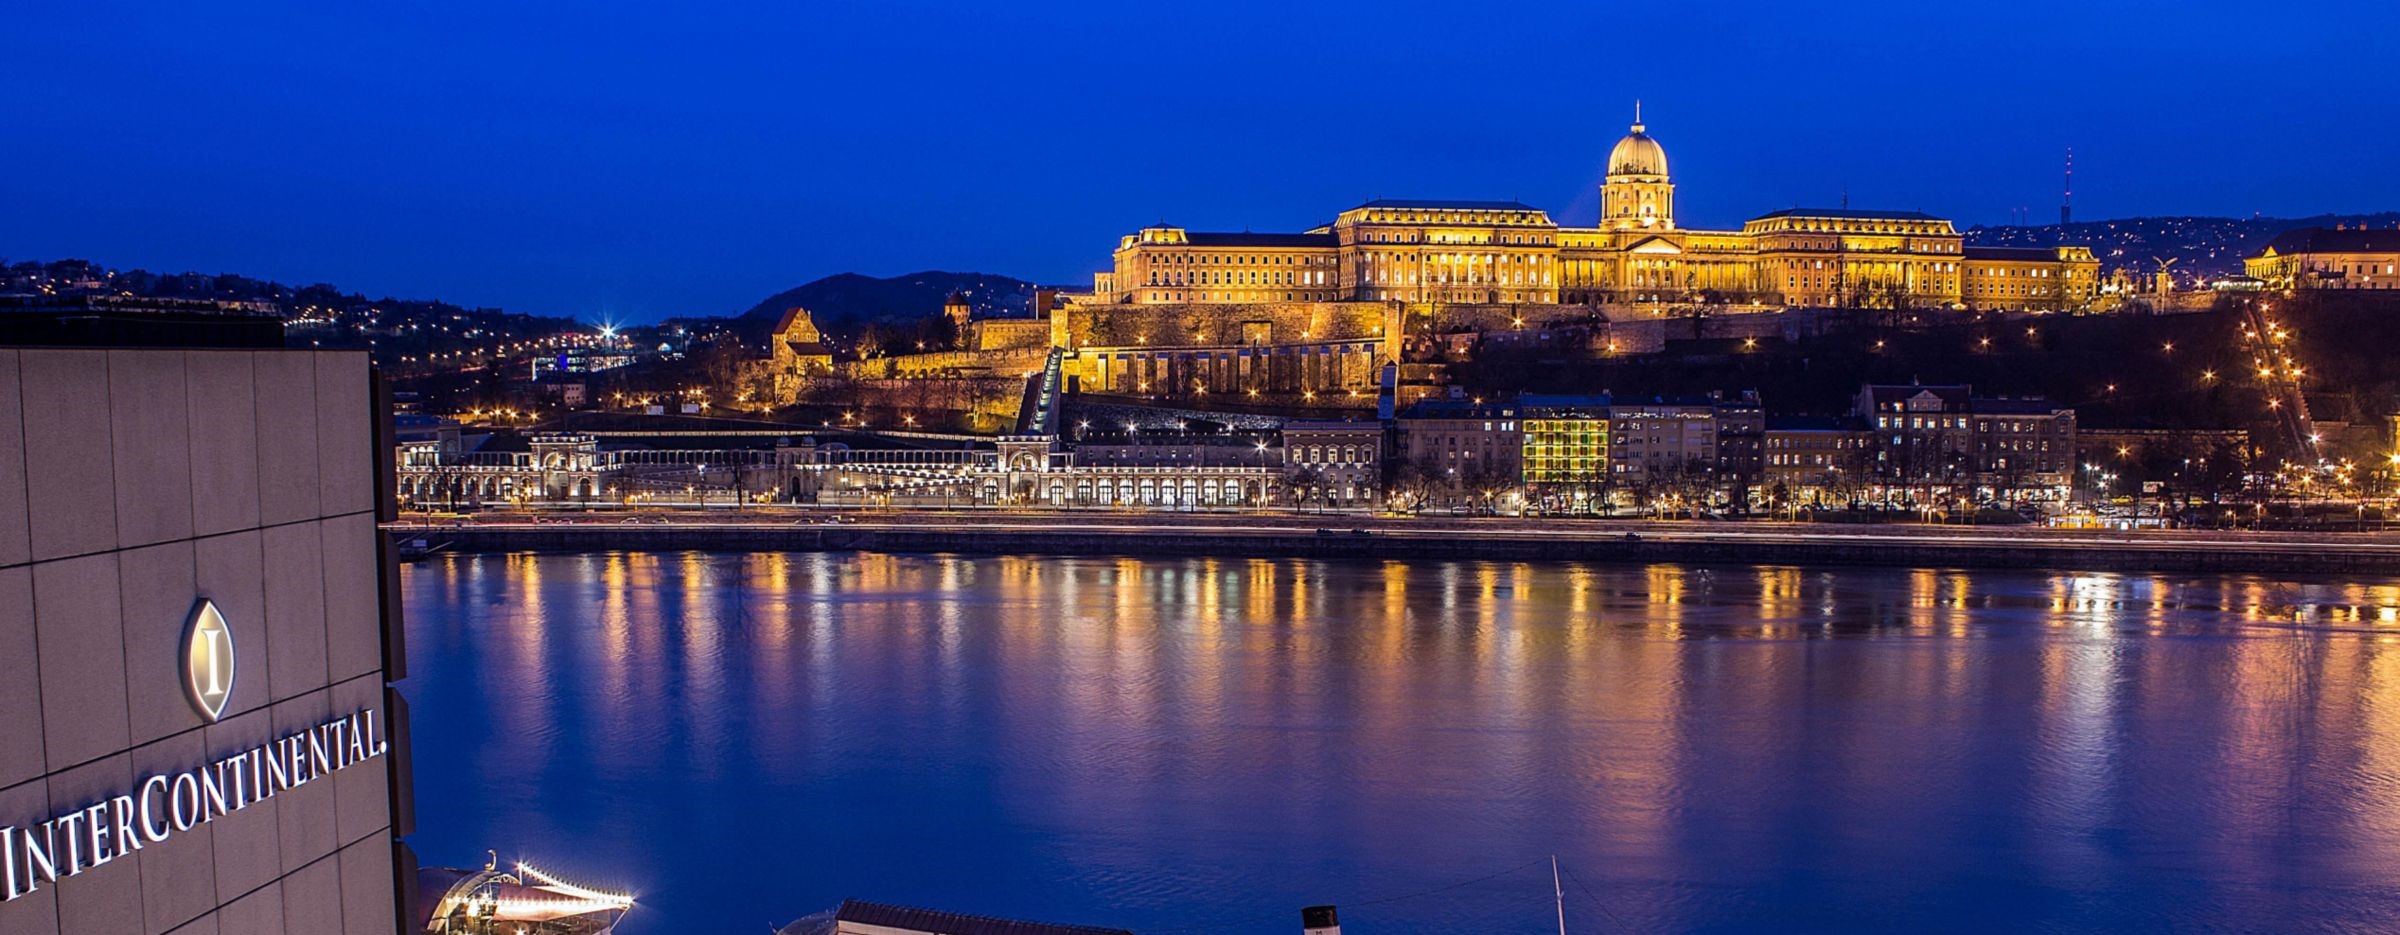 2019 International Joint Conference on Neural Networks (IJCNN), Budapest, Hungary